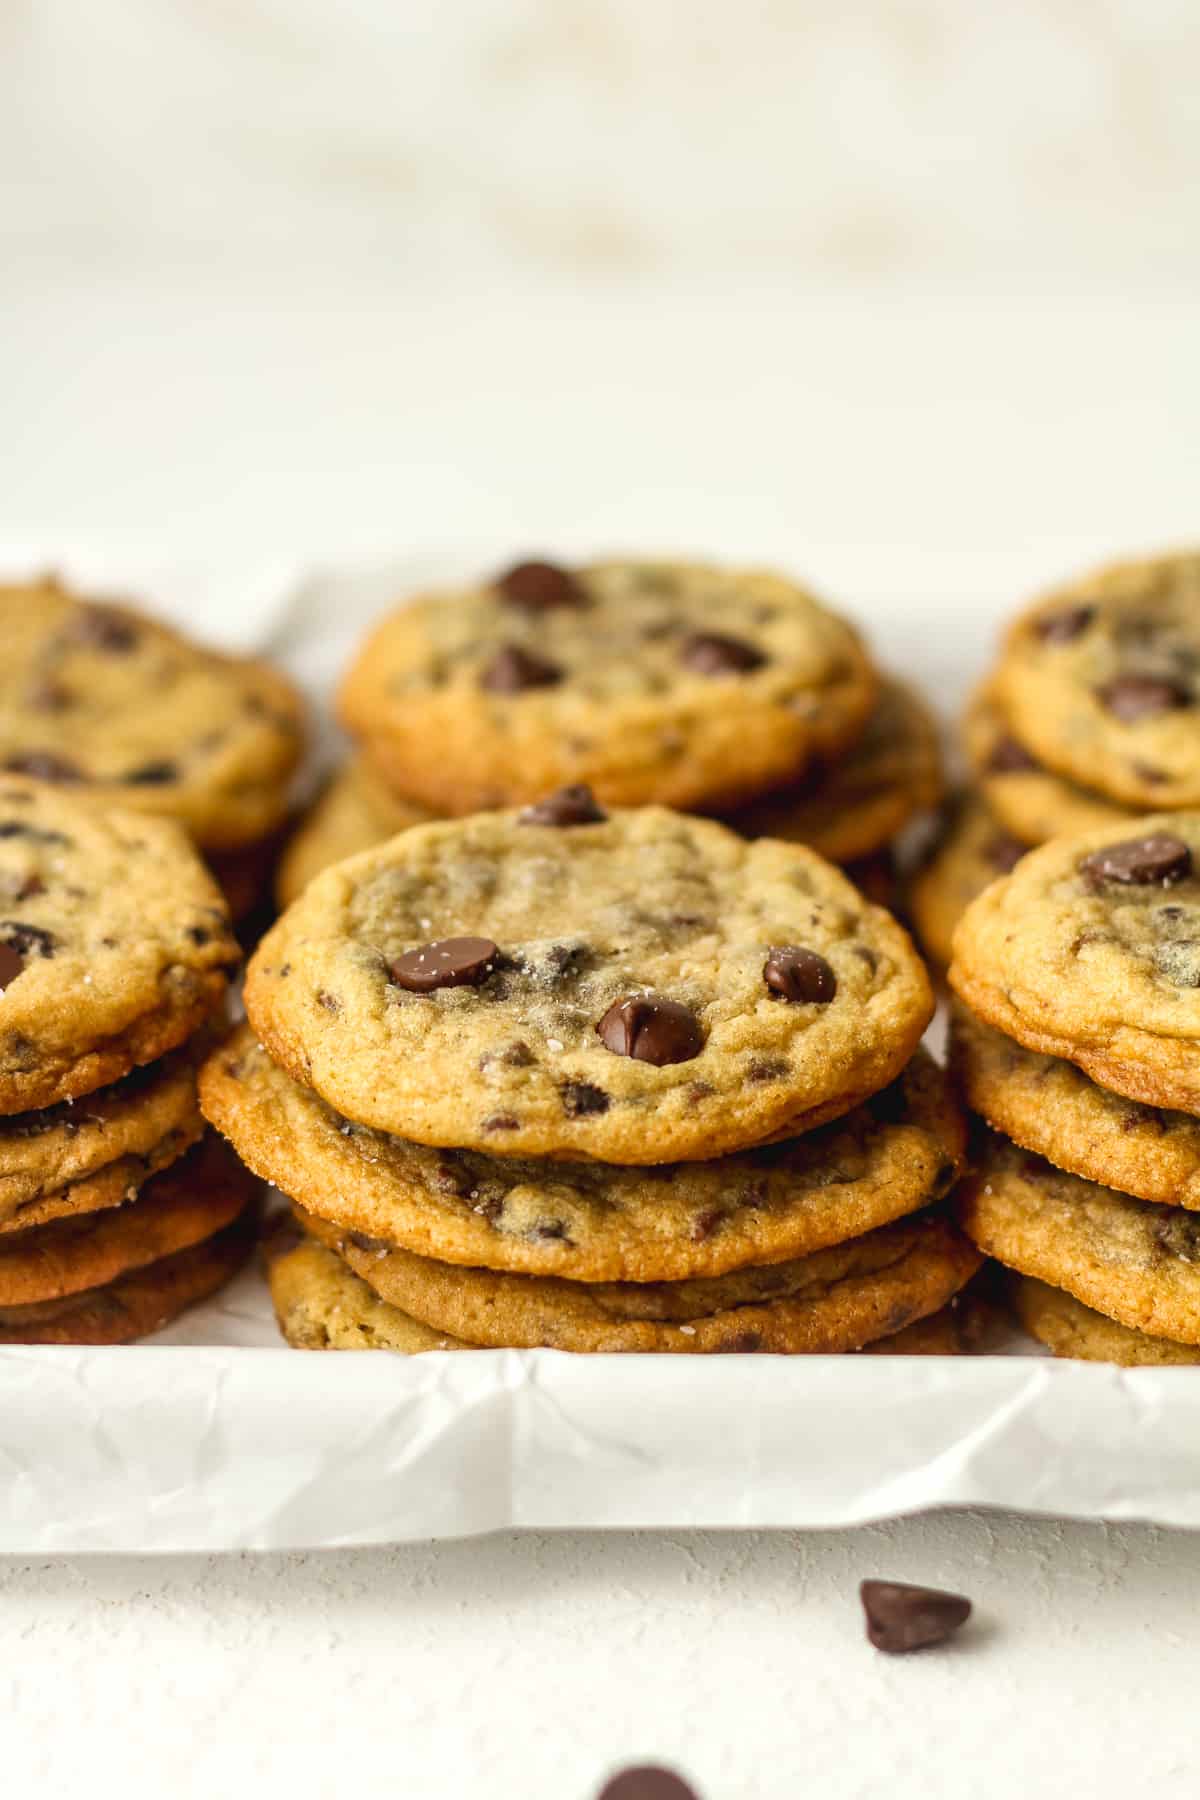 Side view of a tray of stacked chocolate chip cookies.